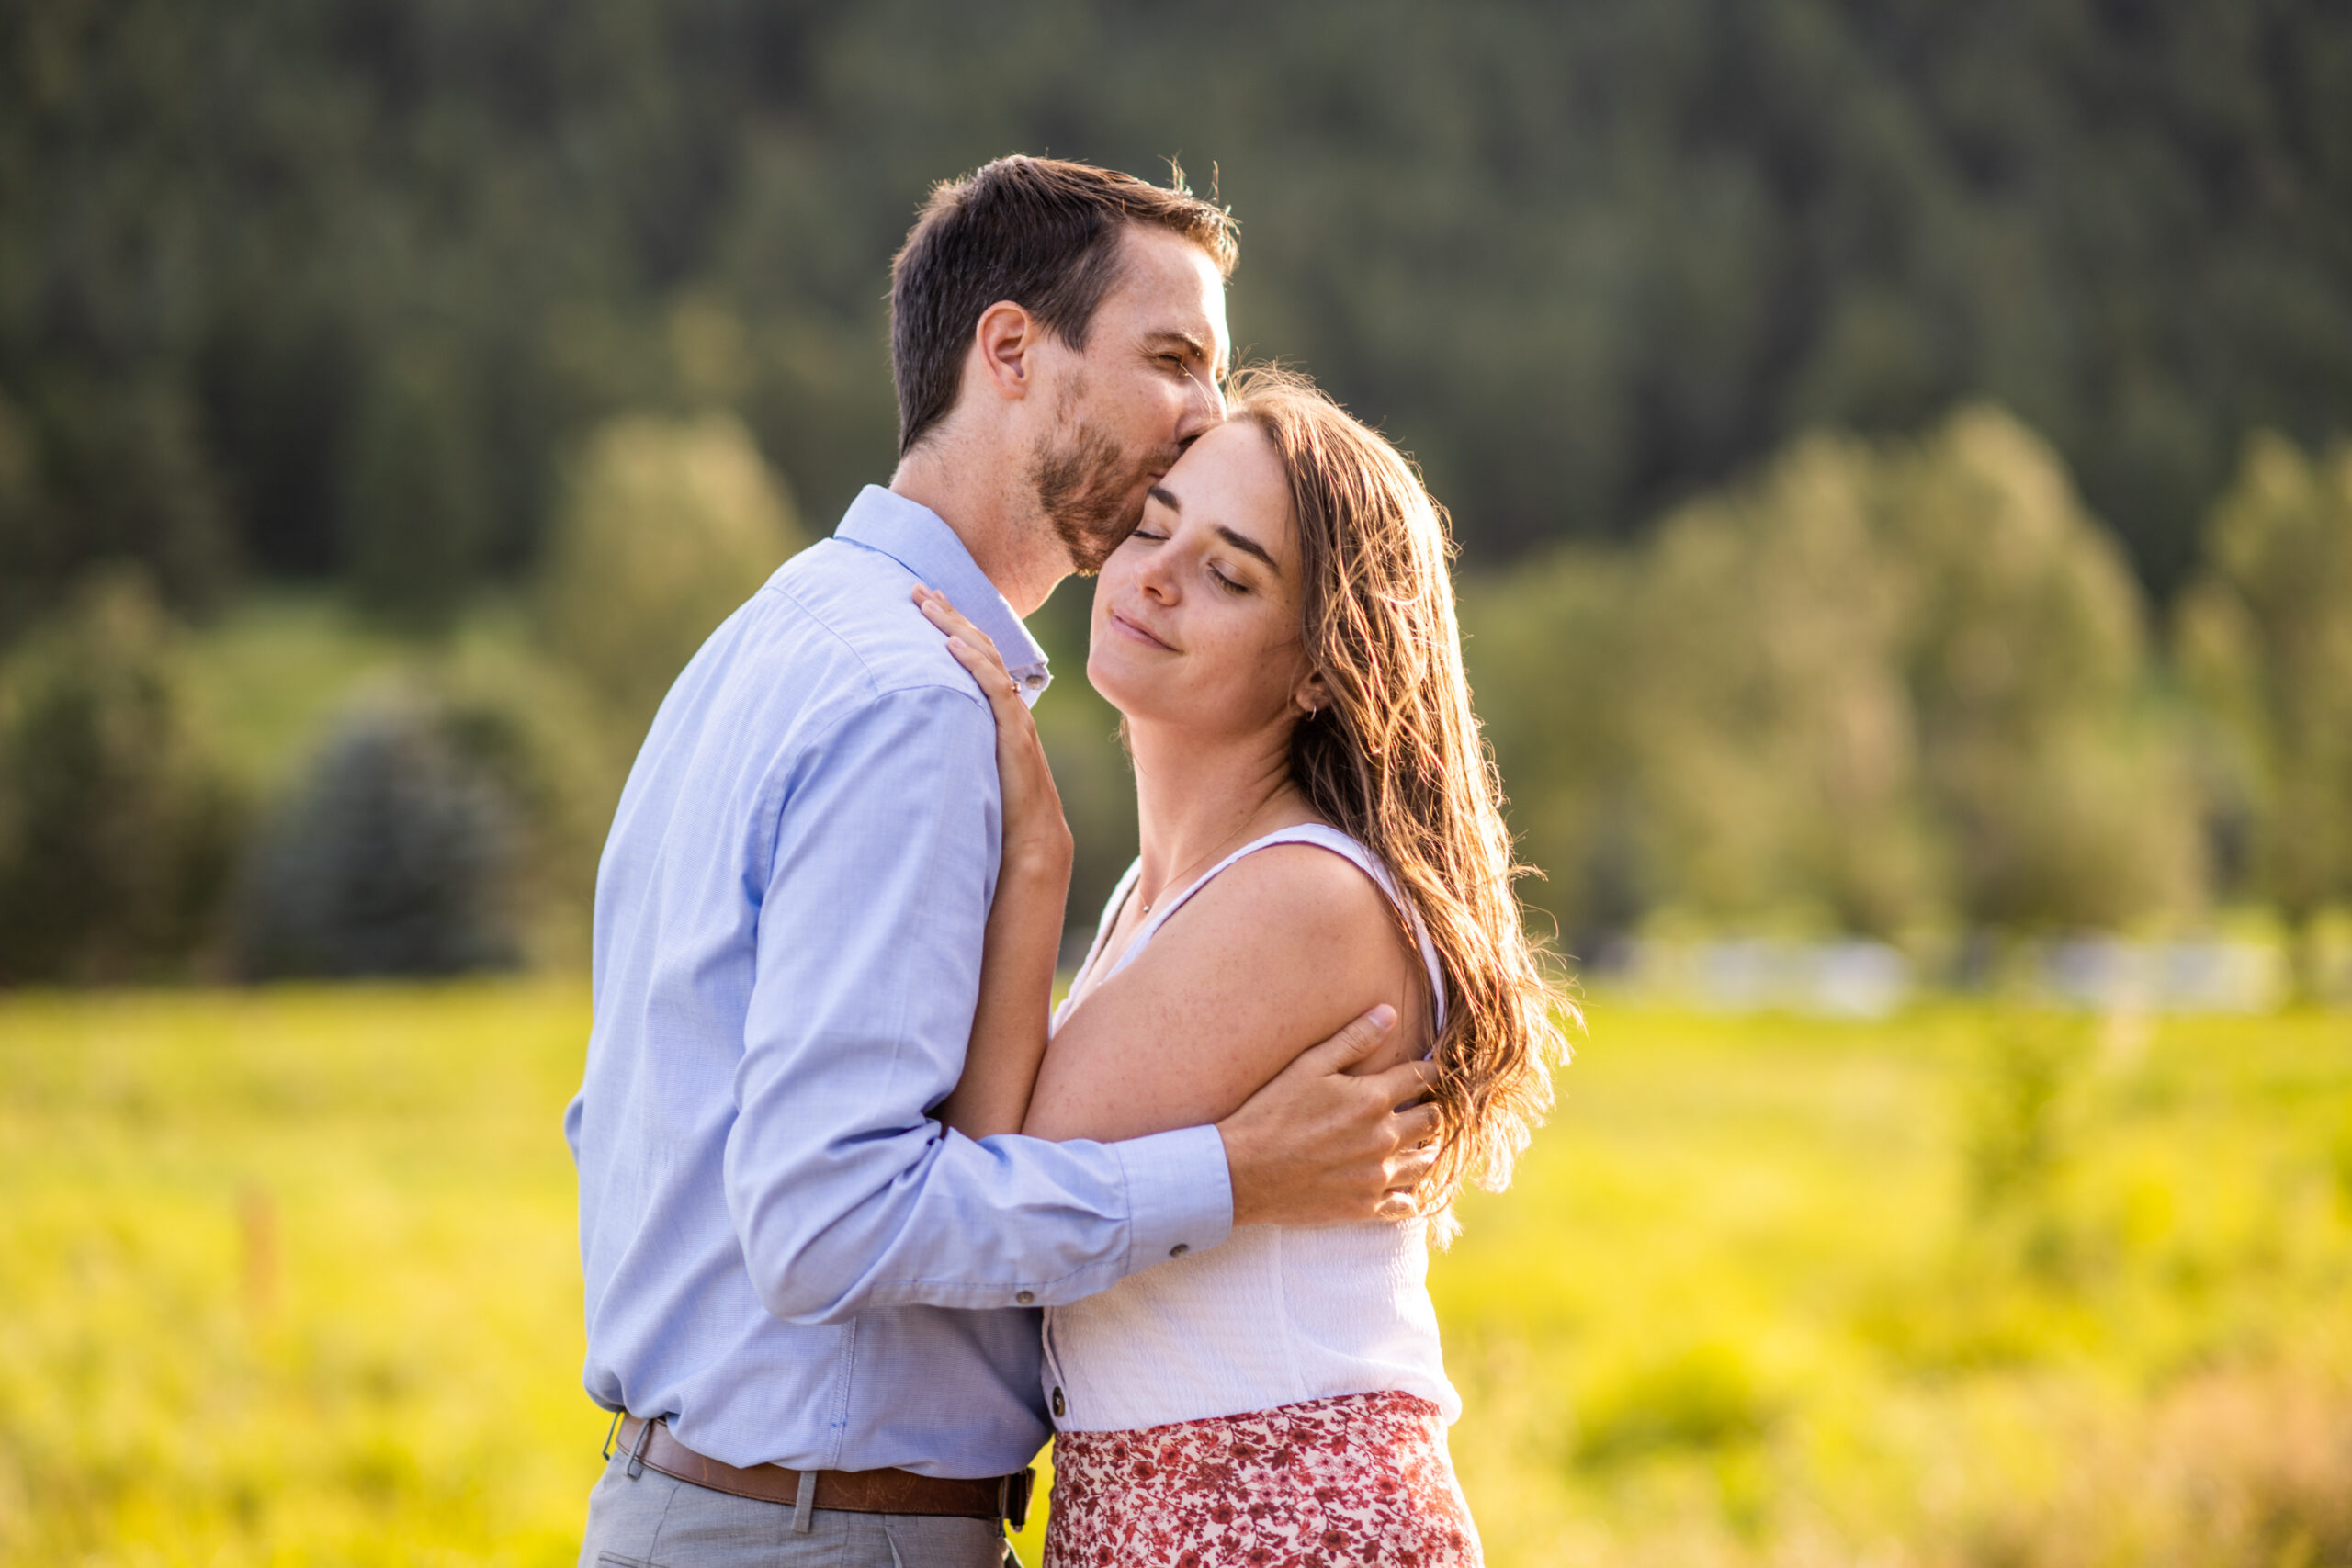 Alice and Joe hug during an engagement photo shoot at Evergreen Lake in Evergreen, Colorado.